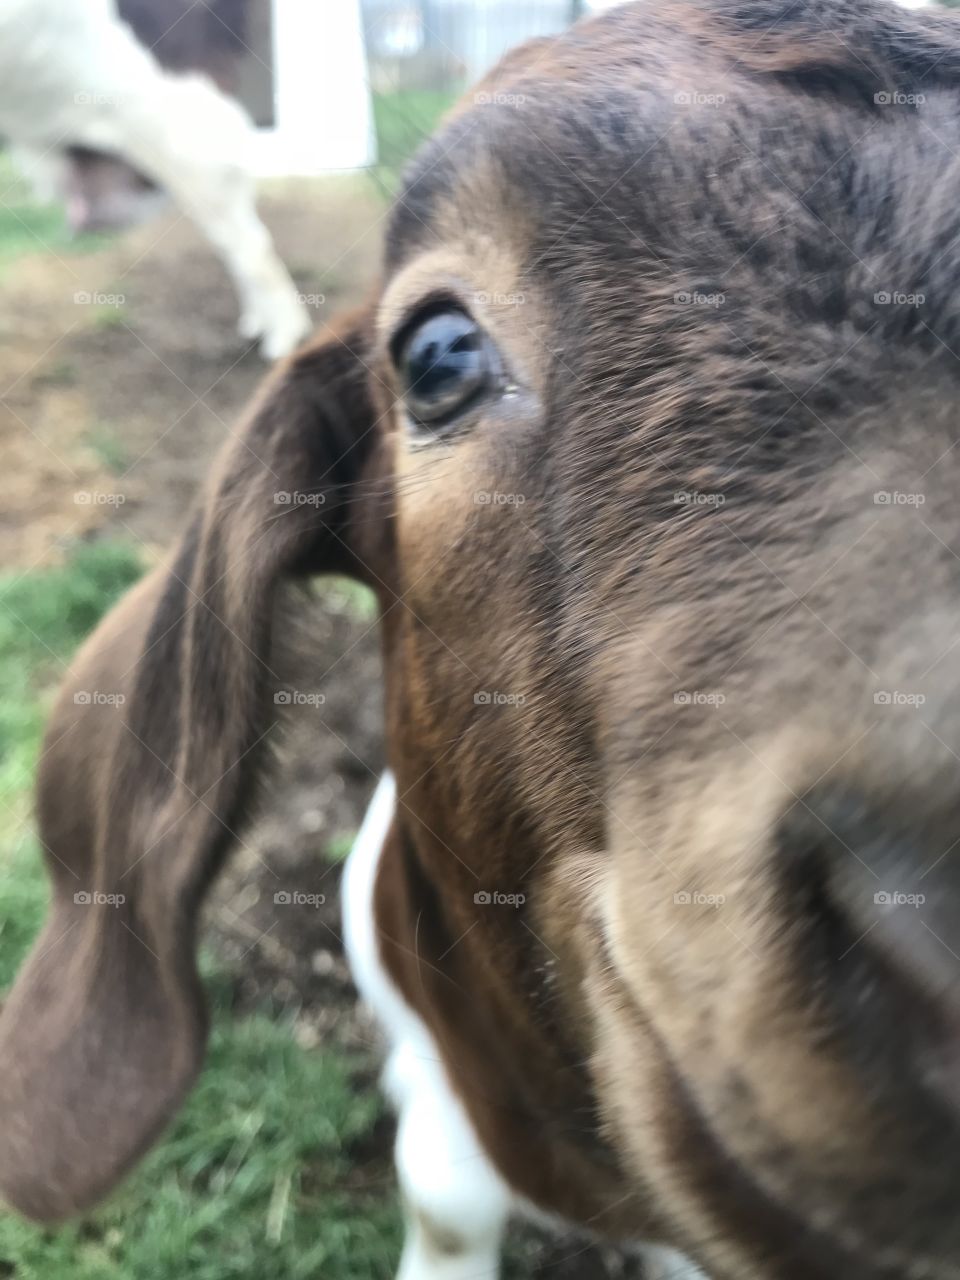 Momma goat begging for a little attention since her baby seems to be getting all of it.